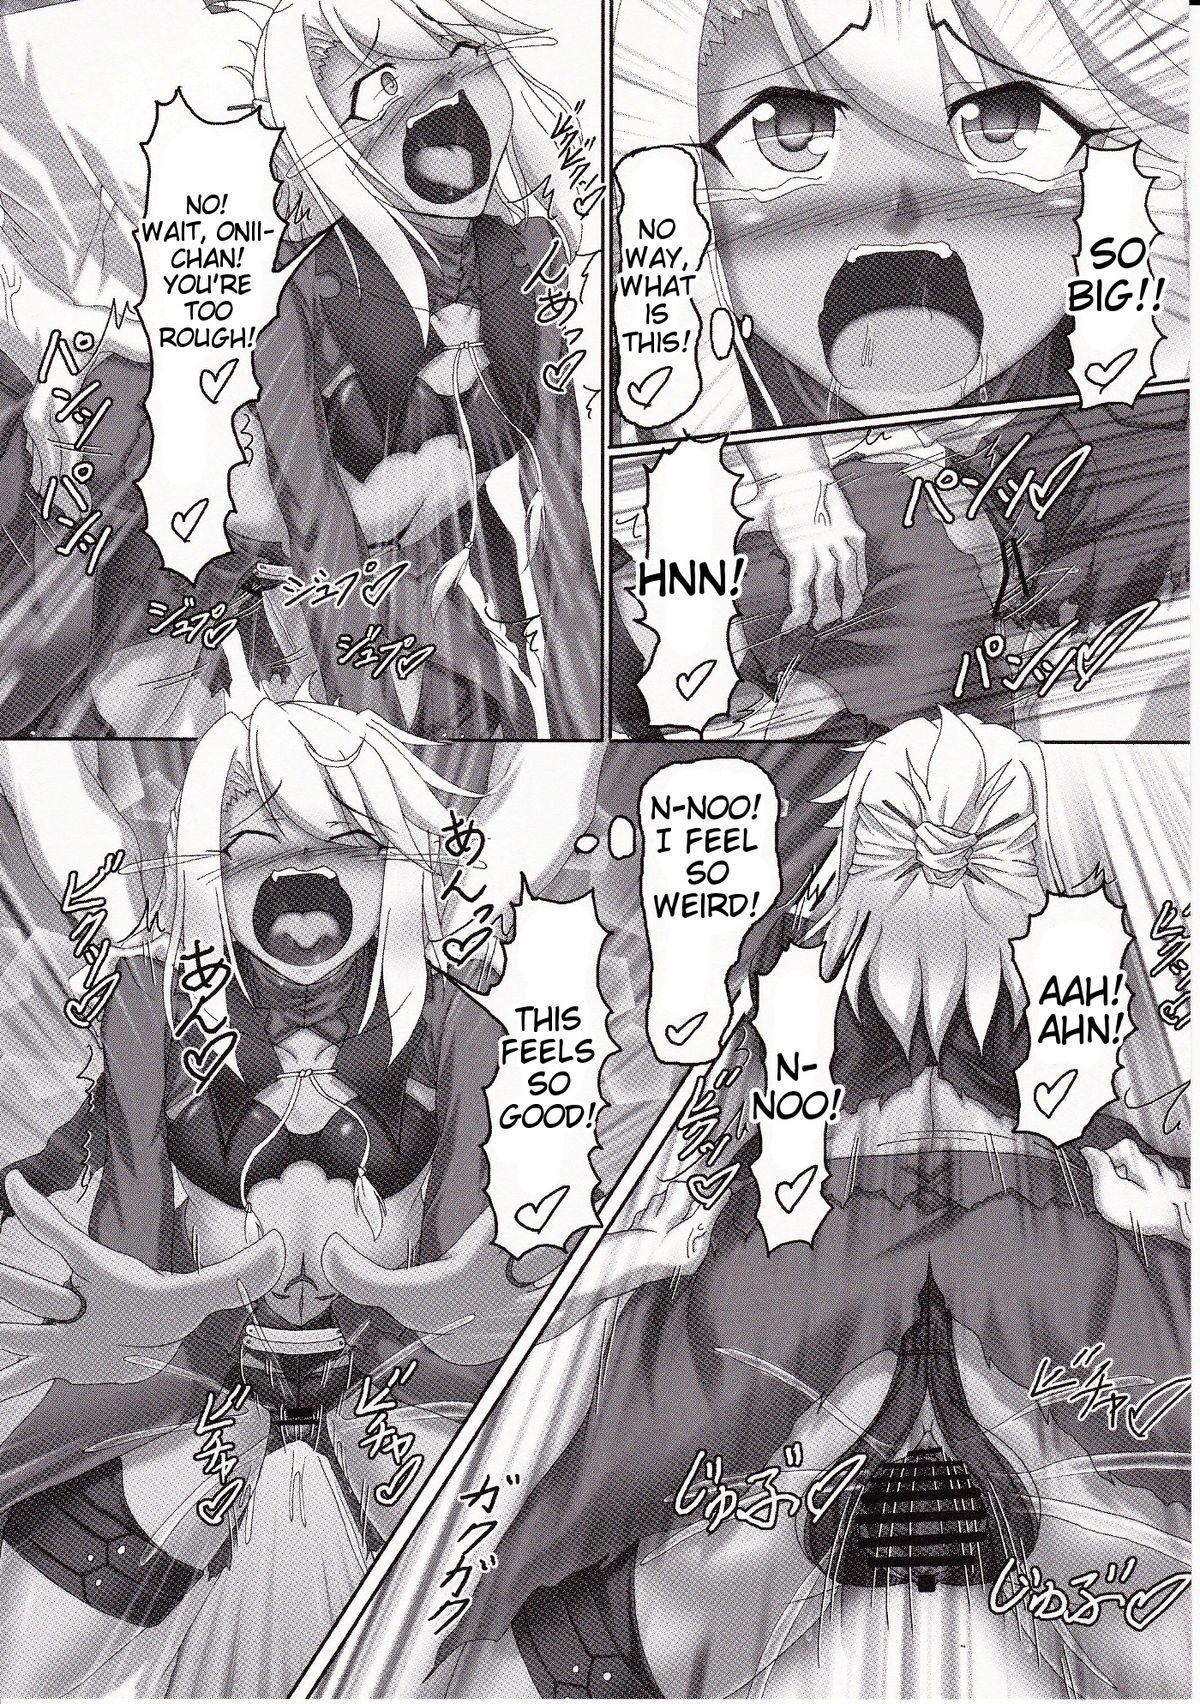 Trannies Magical Ruby chan no Seigi wo Daite Dekishi shiro!! | Drowning in Magical Ruby-chan's Sexual Powers!! - Fate kaleid liner prisma illya Mexico - Page 9